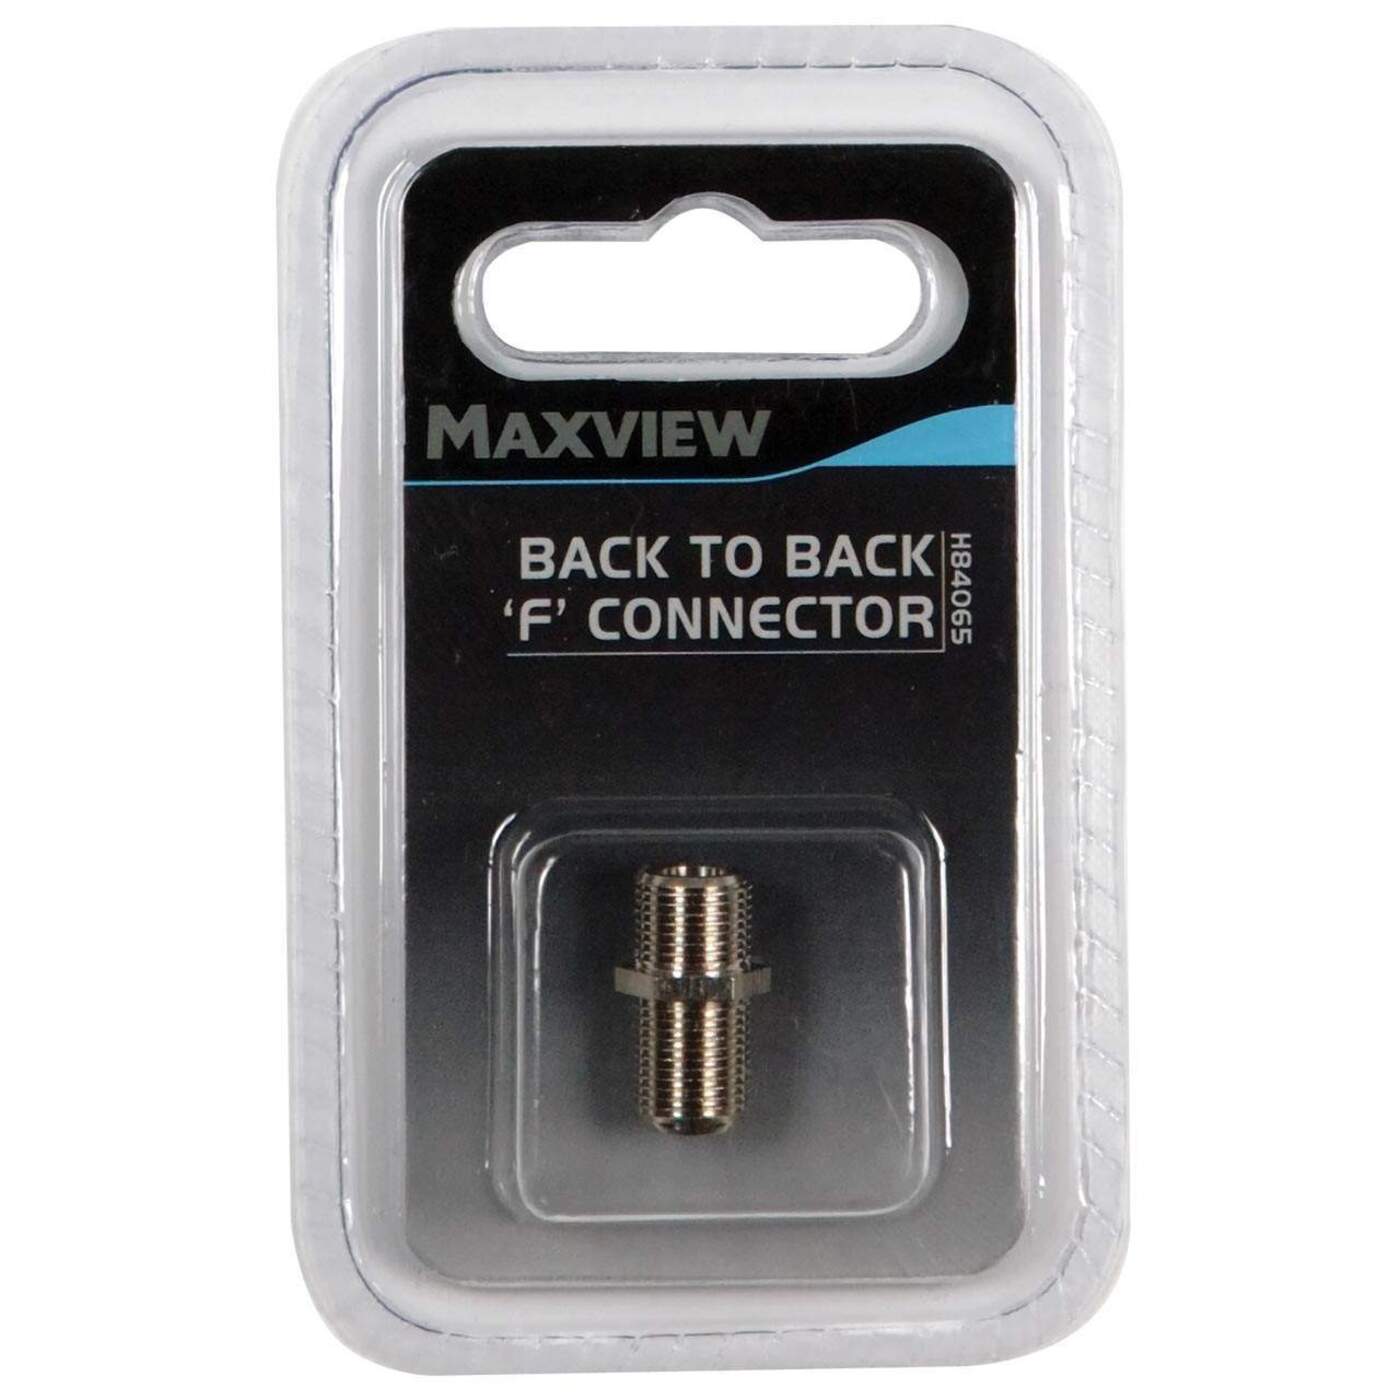 Maxview F Back To Back Connector